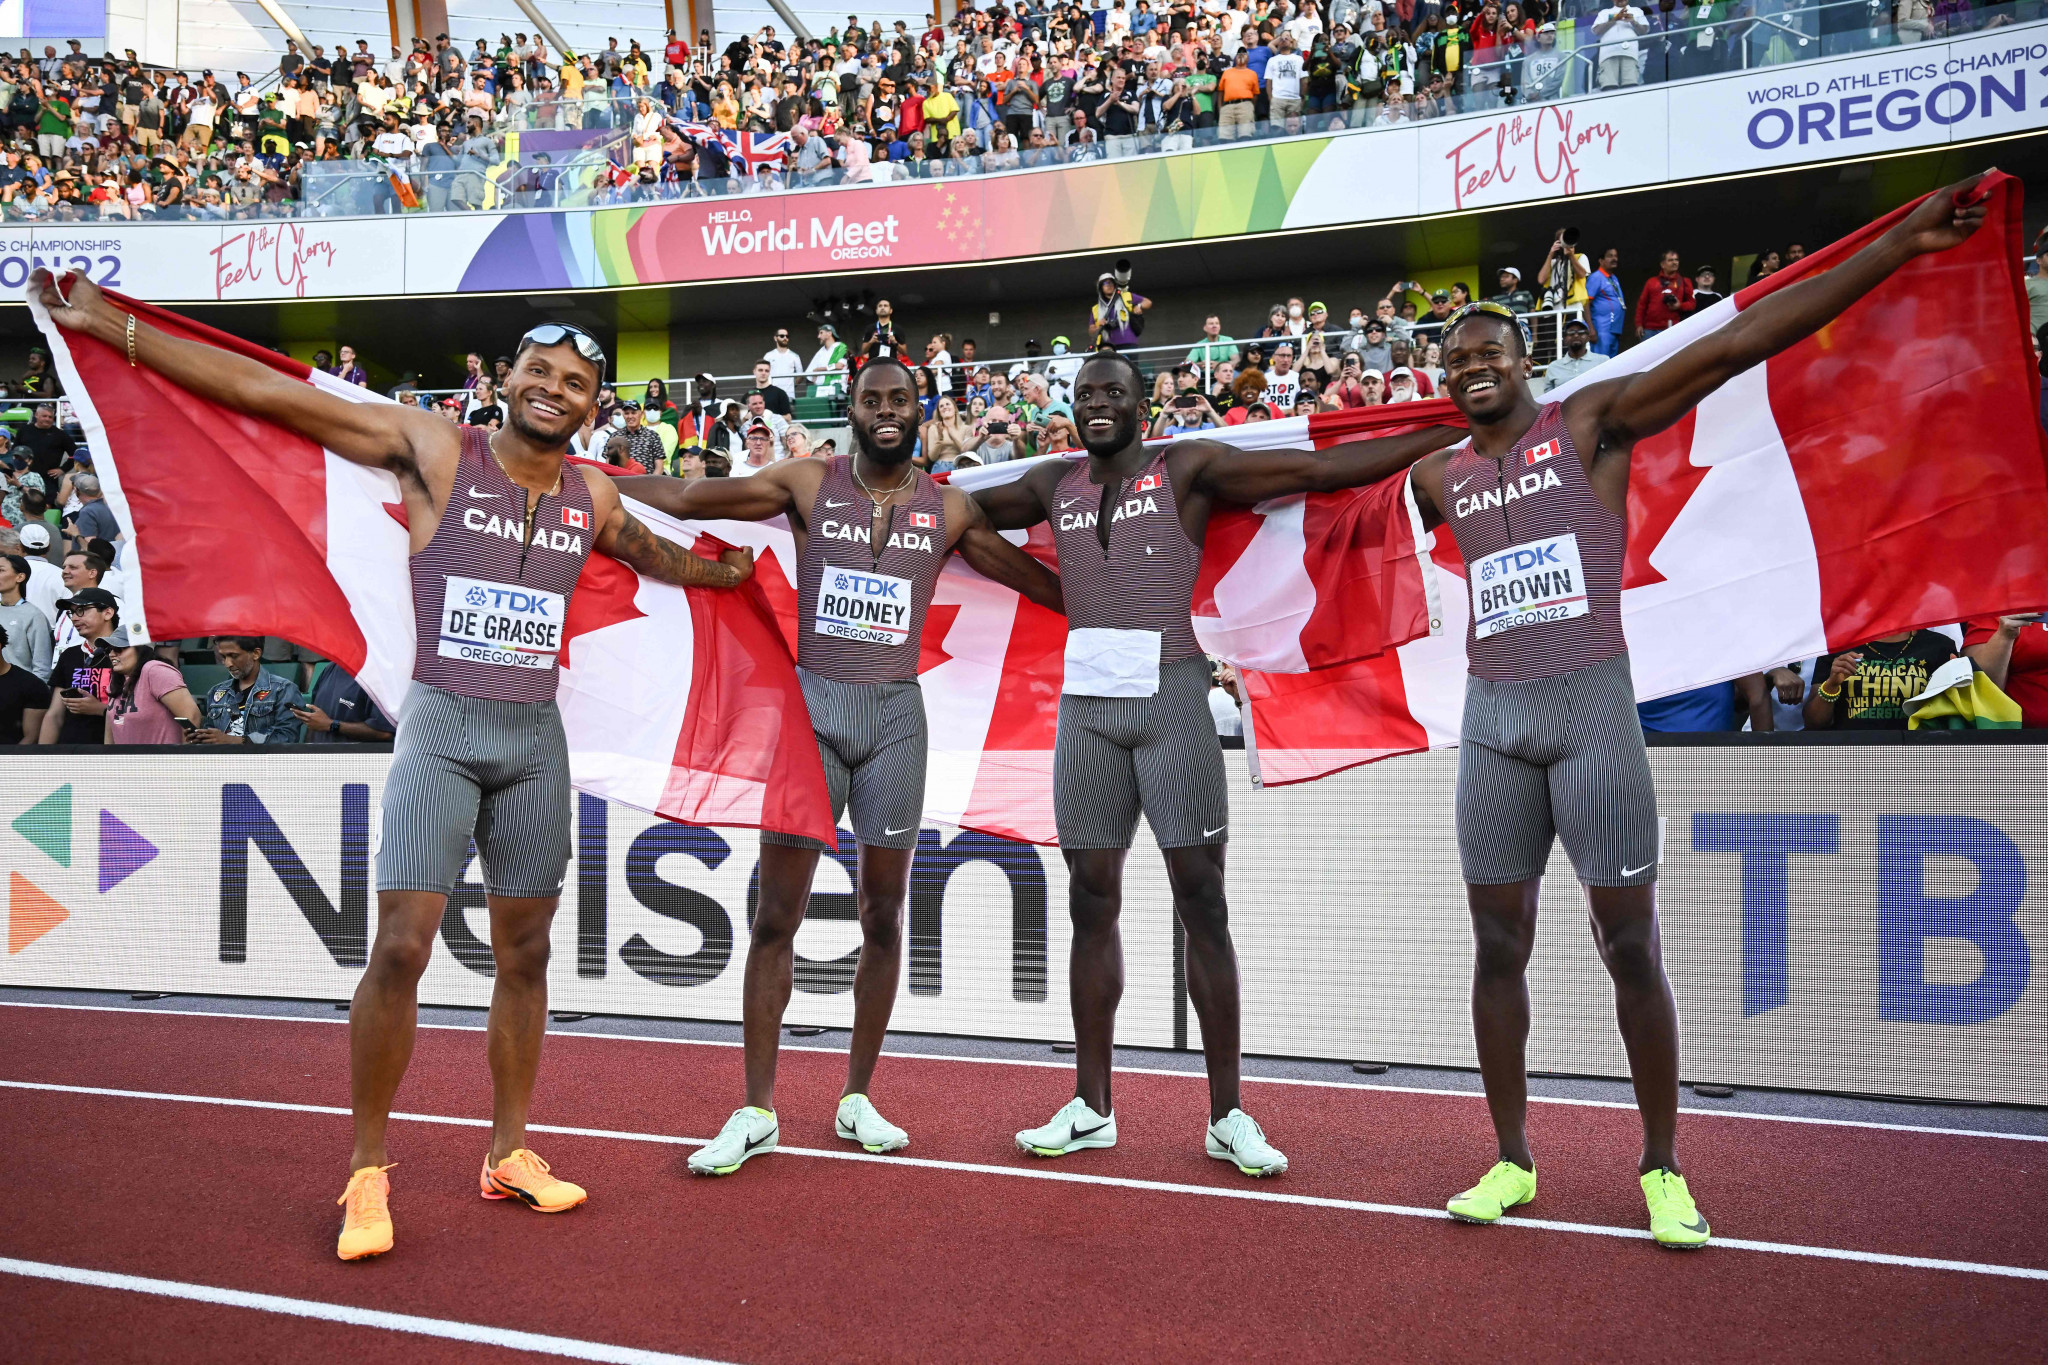 
Canada's Andre De Grasse, Brendon Rodney, Jerome Blake, and Aaron Brown pose with the national flag after winning the relay gold in Eugene ©Getty Images